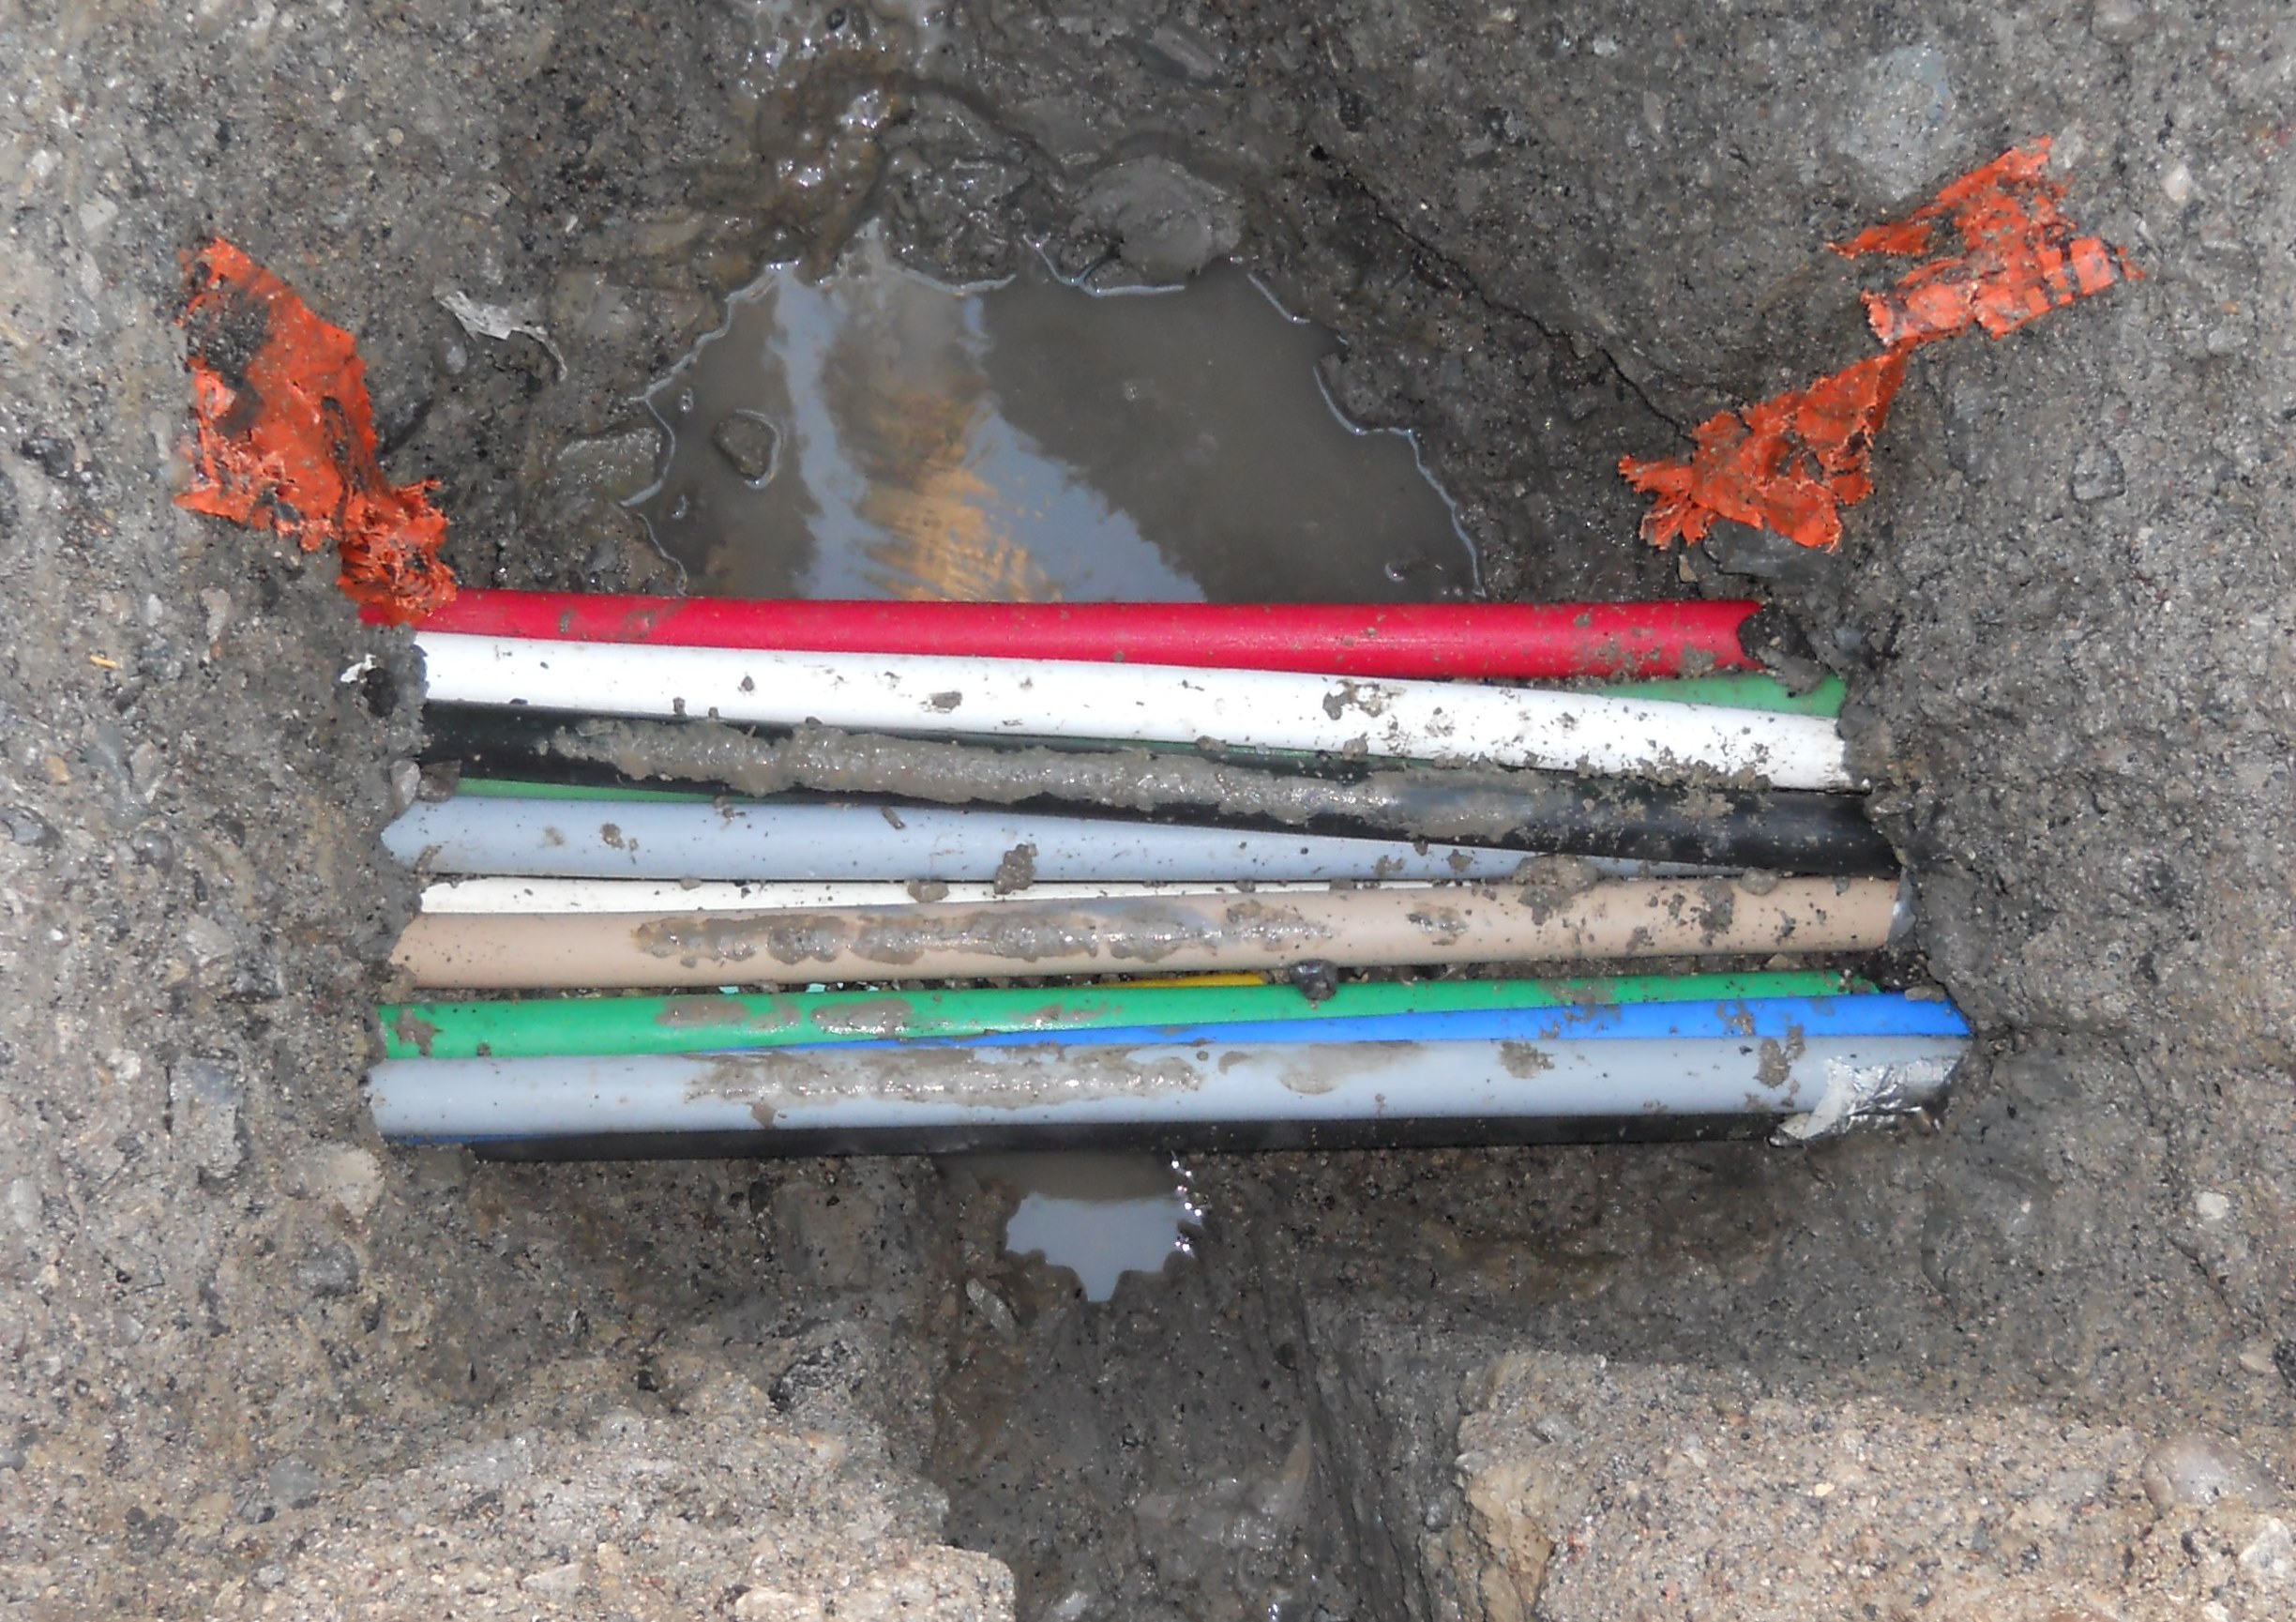 Informative Image showing a group of utilities (pipes and conduit) that have been exposed as a result of Hydro Vacuum Excavation performed by multiVIEW field technicians on a major roadway. Several utility pipes and conduits can be seen group together in parallel.